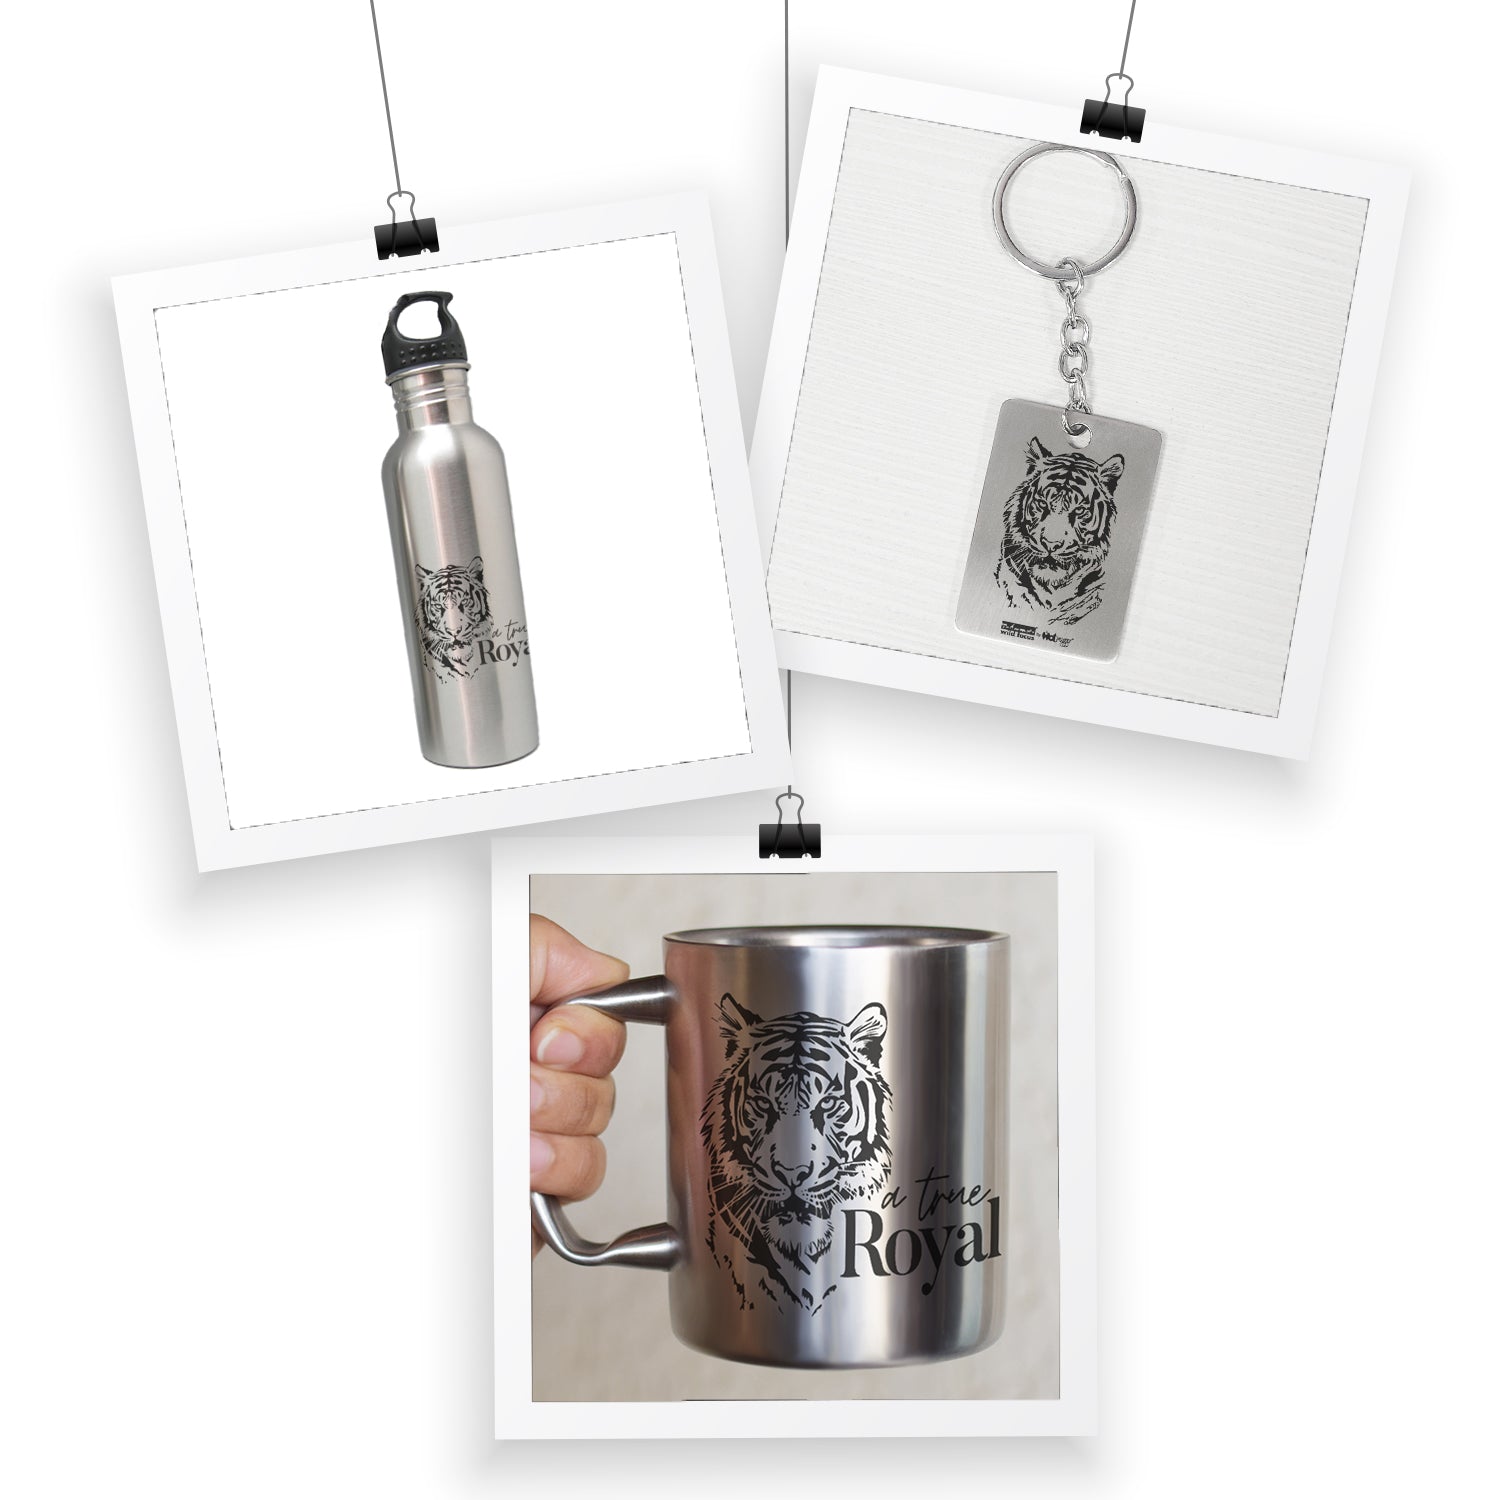 A Royal King Tiger - A Perfect Mug Bottle Everyday Drinkware Combo with Keychain (1 Mug, 1 Bottle, 1 Keychain)